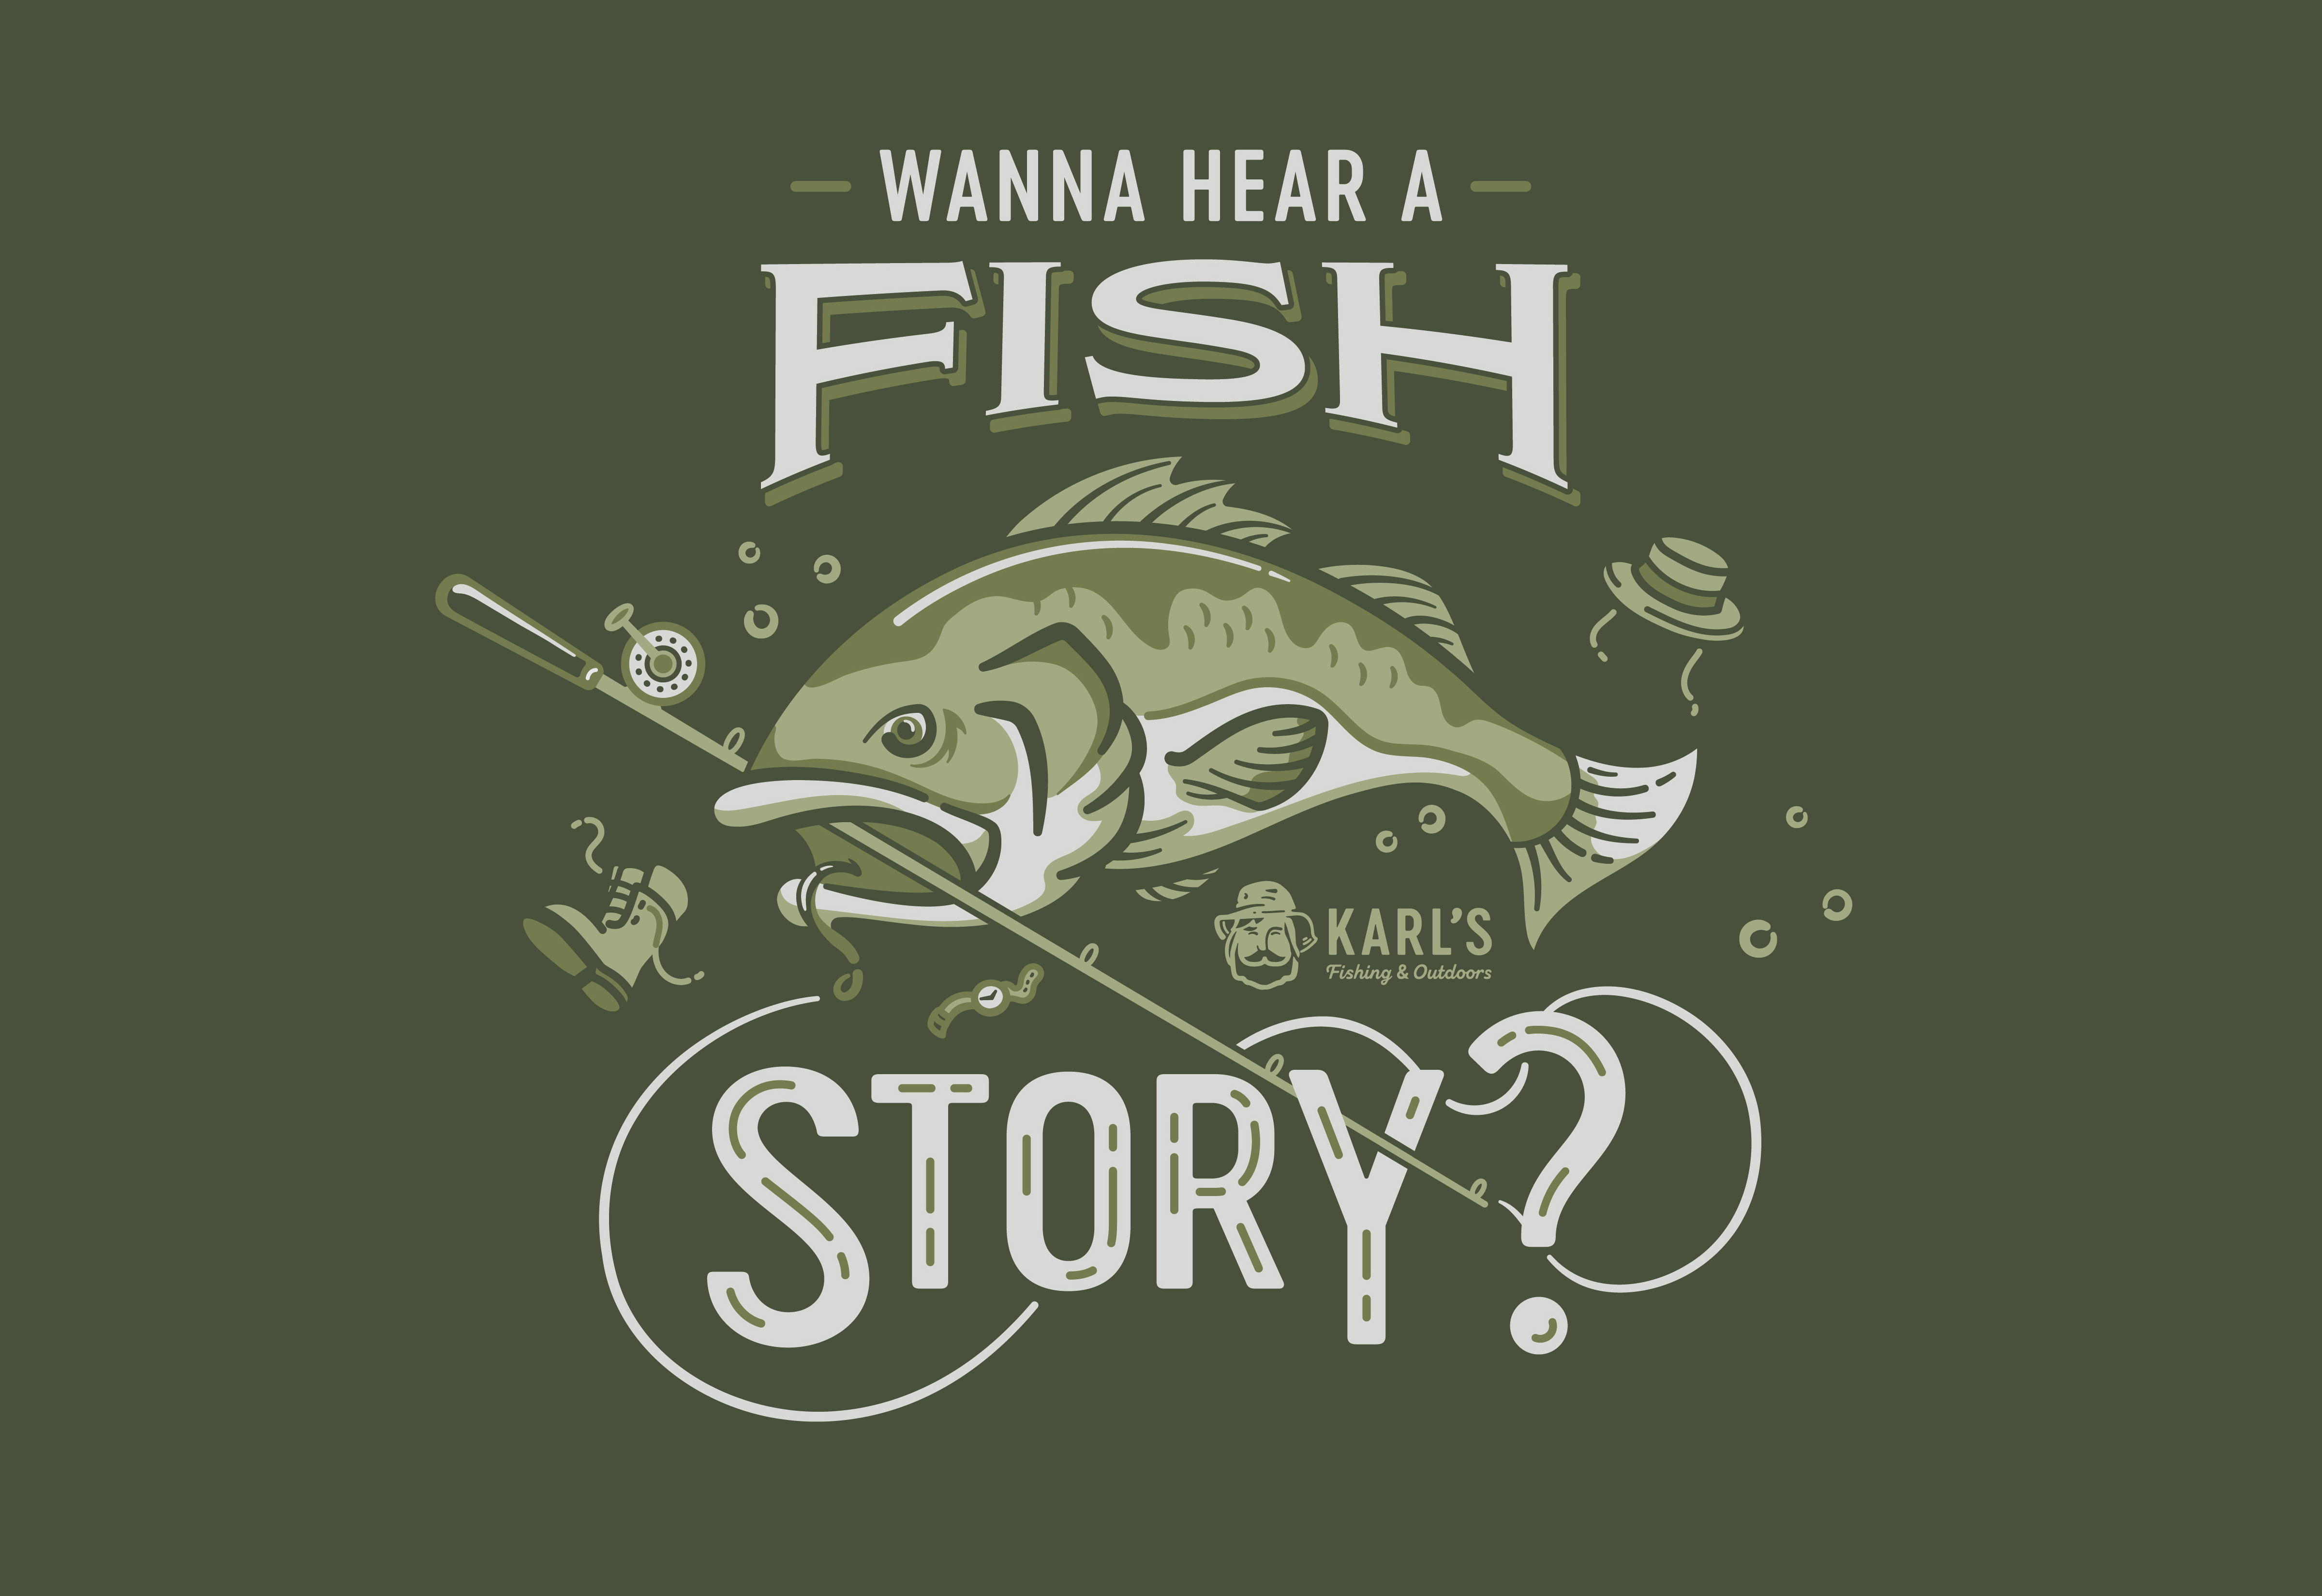 Big Fish Story Badge by James Pruitt on Dribbble